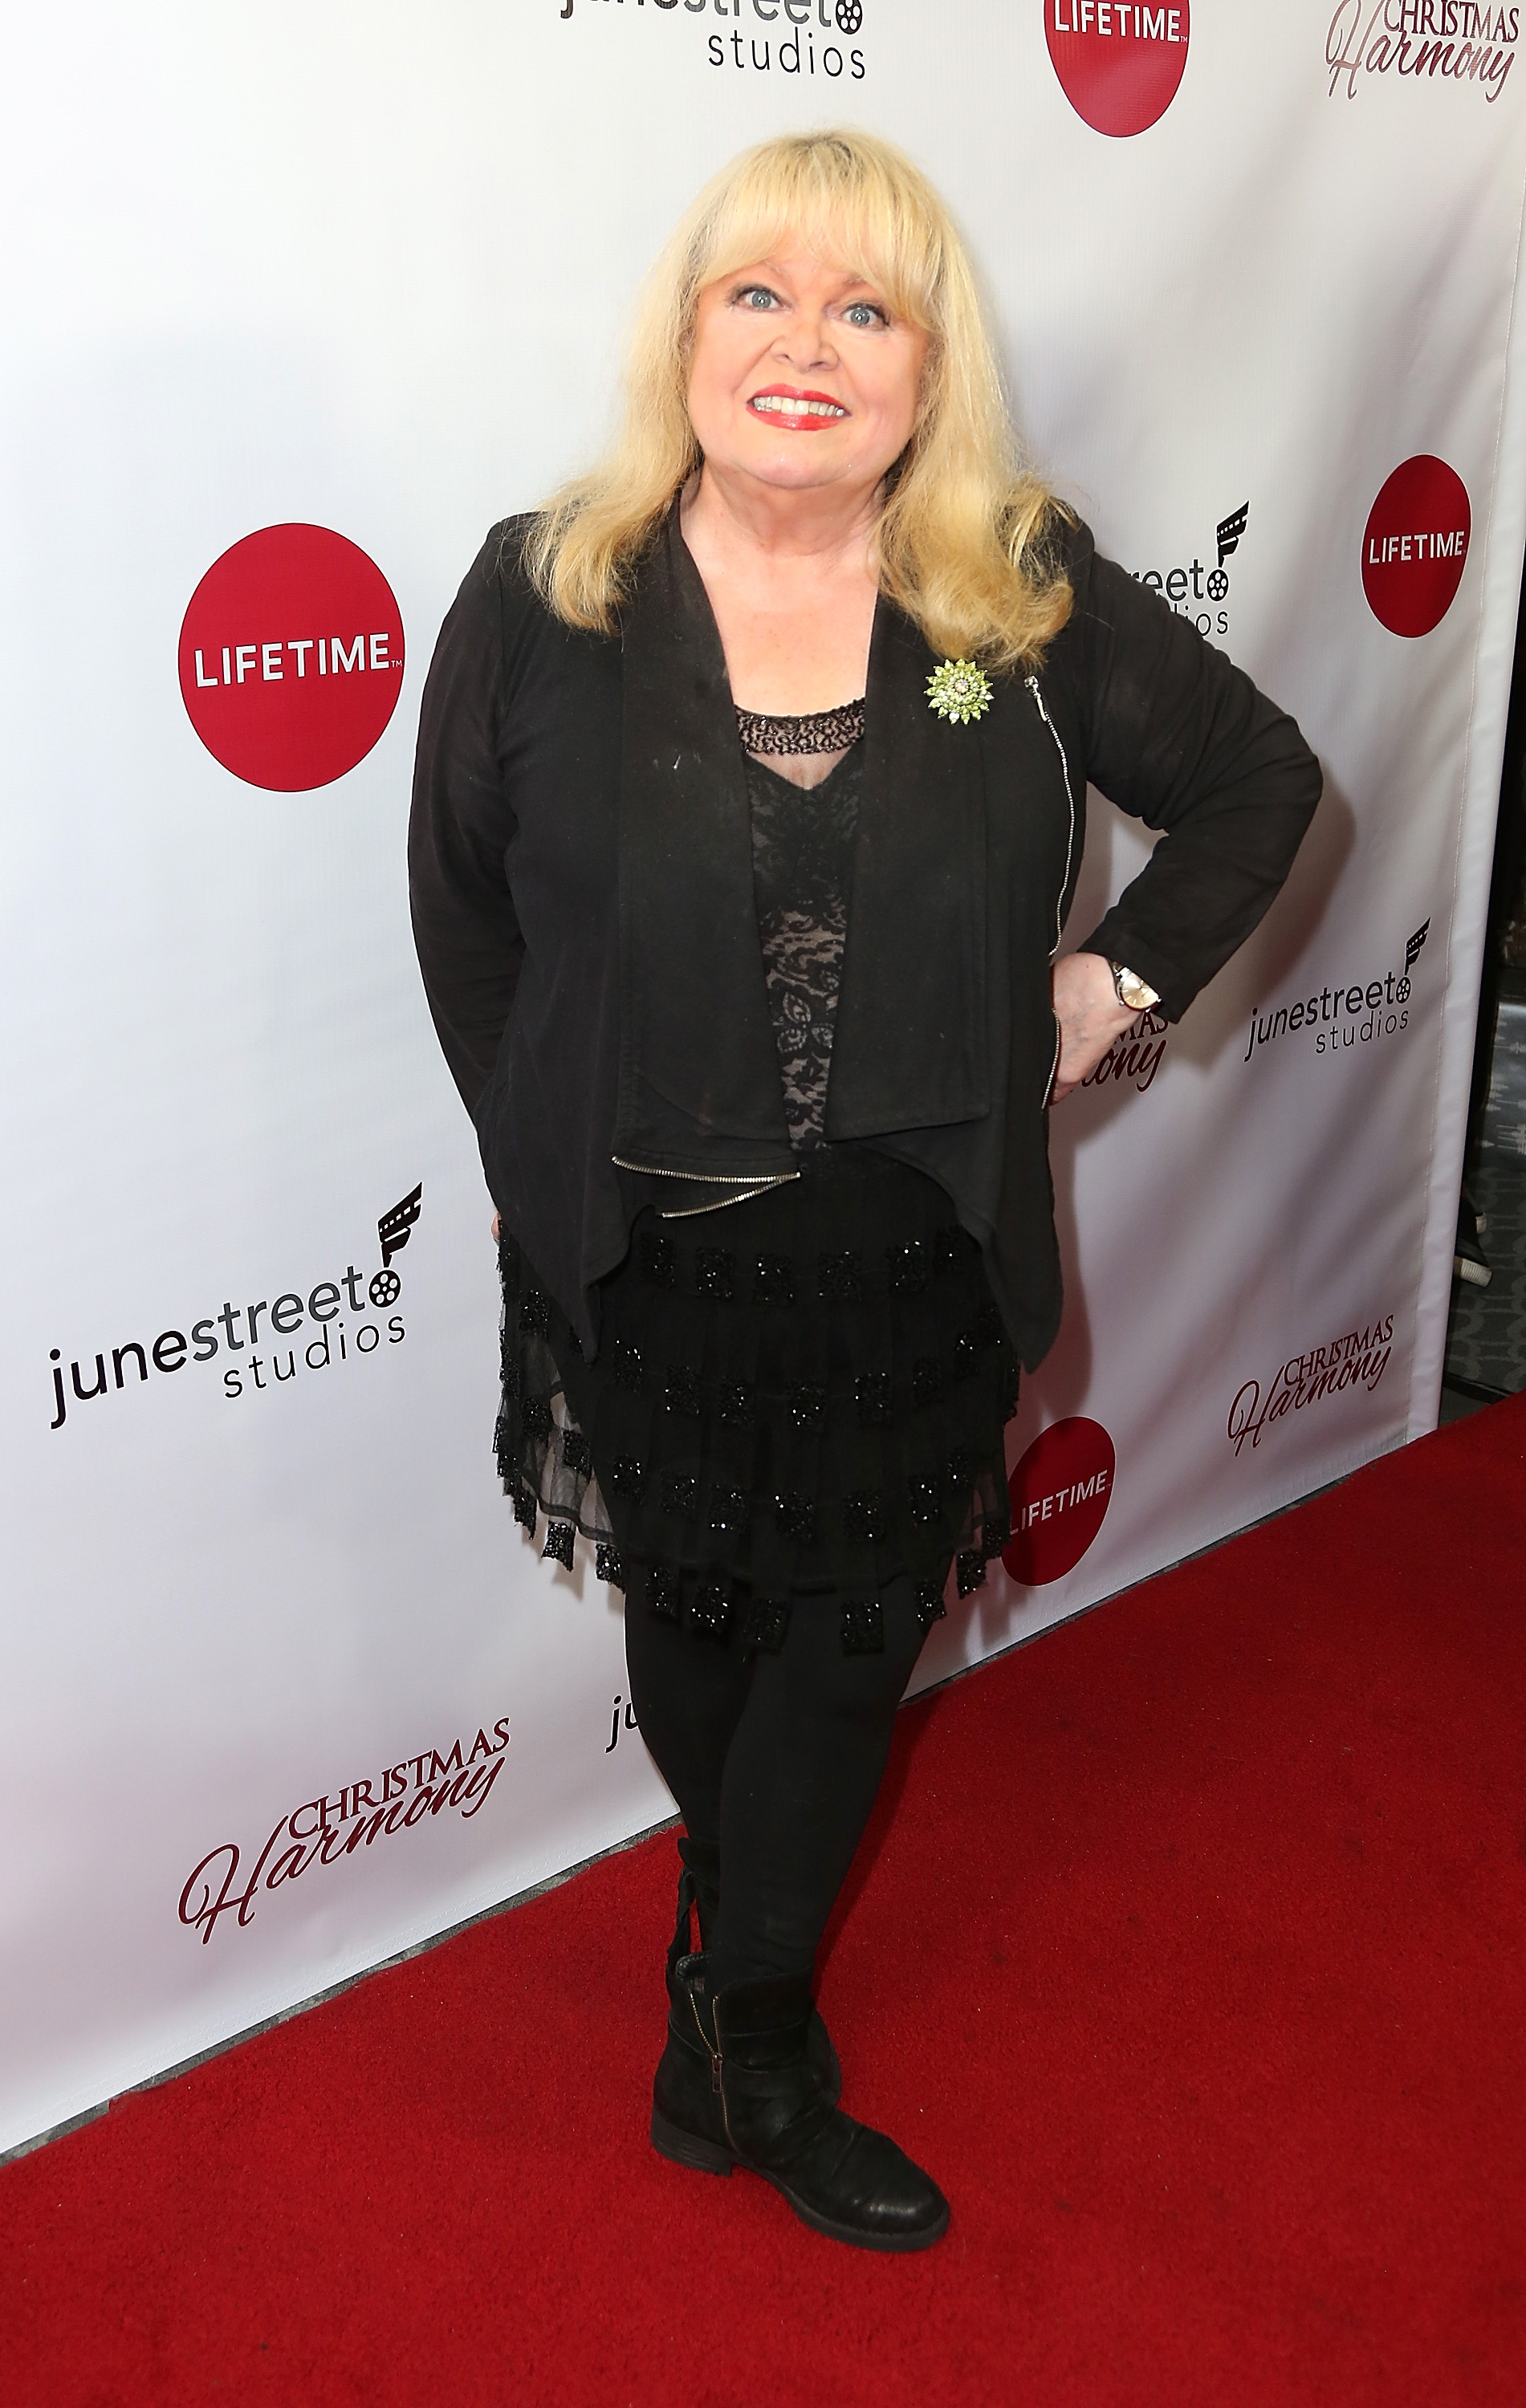 Sally Struthers posing with hand on hip at Lifetime's Christmas Harmony premiere